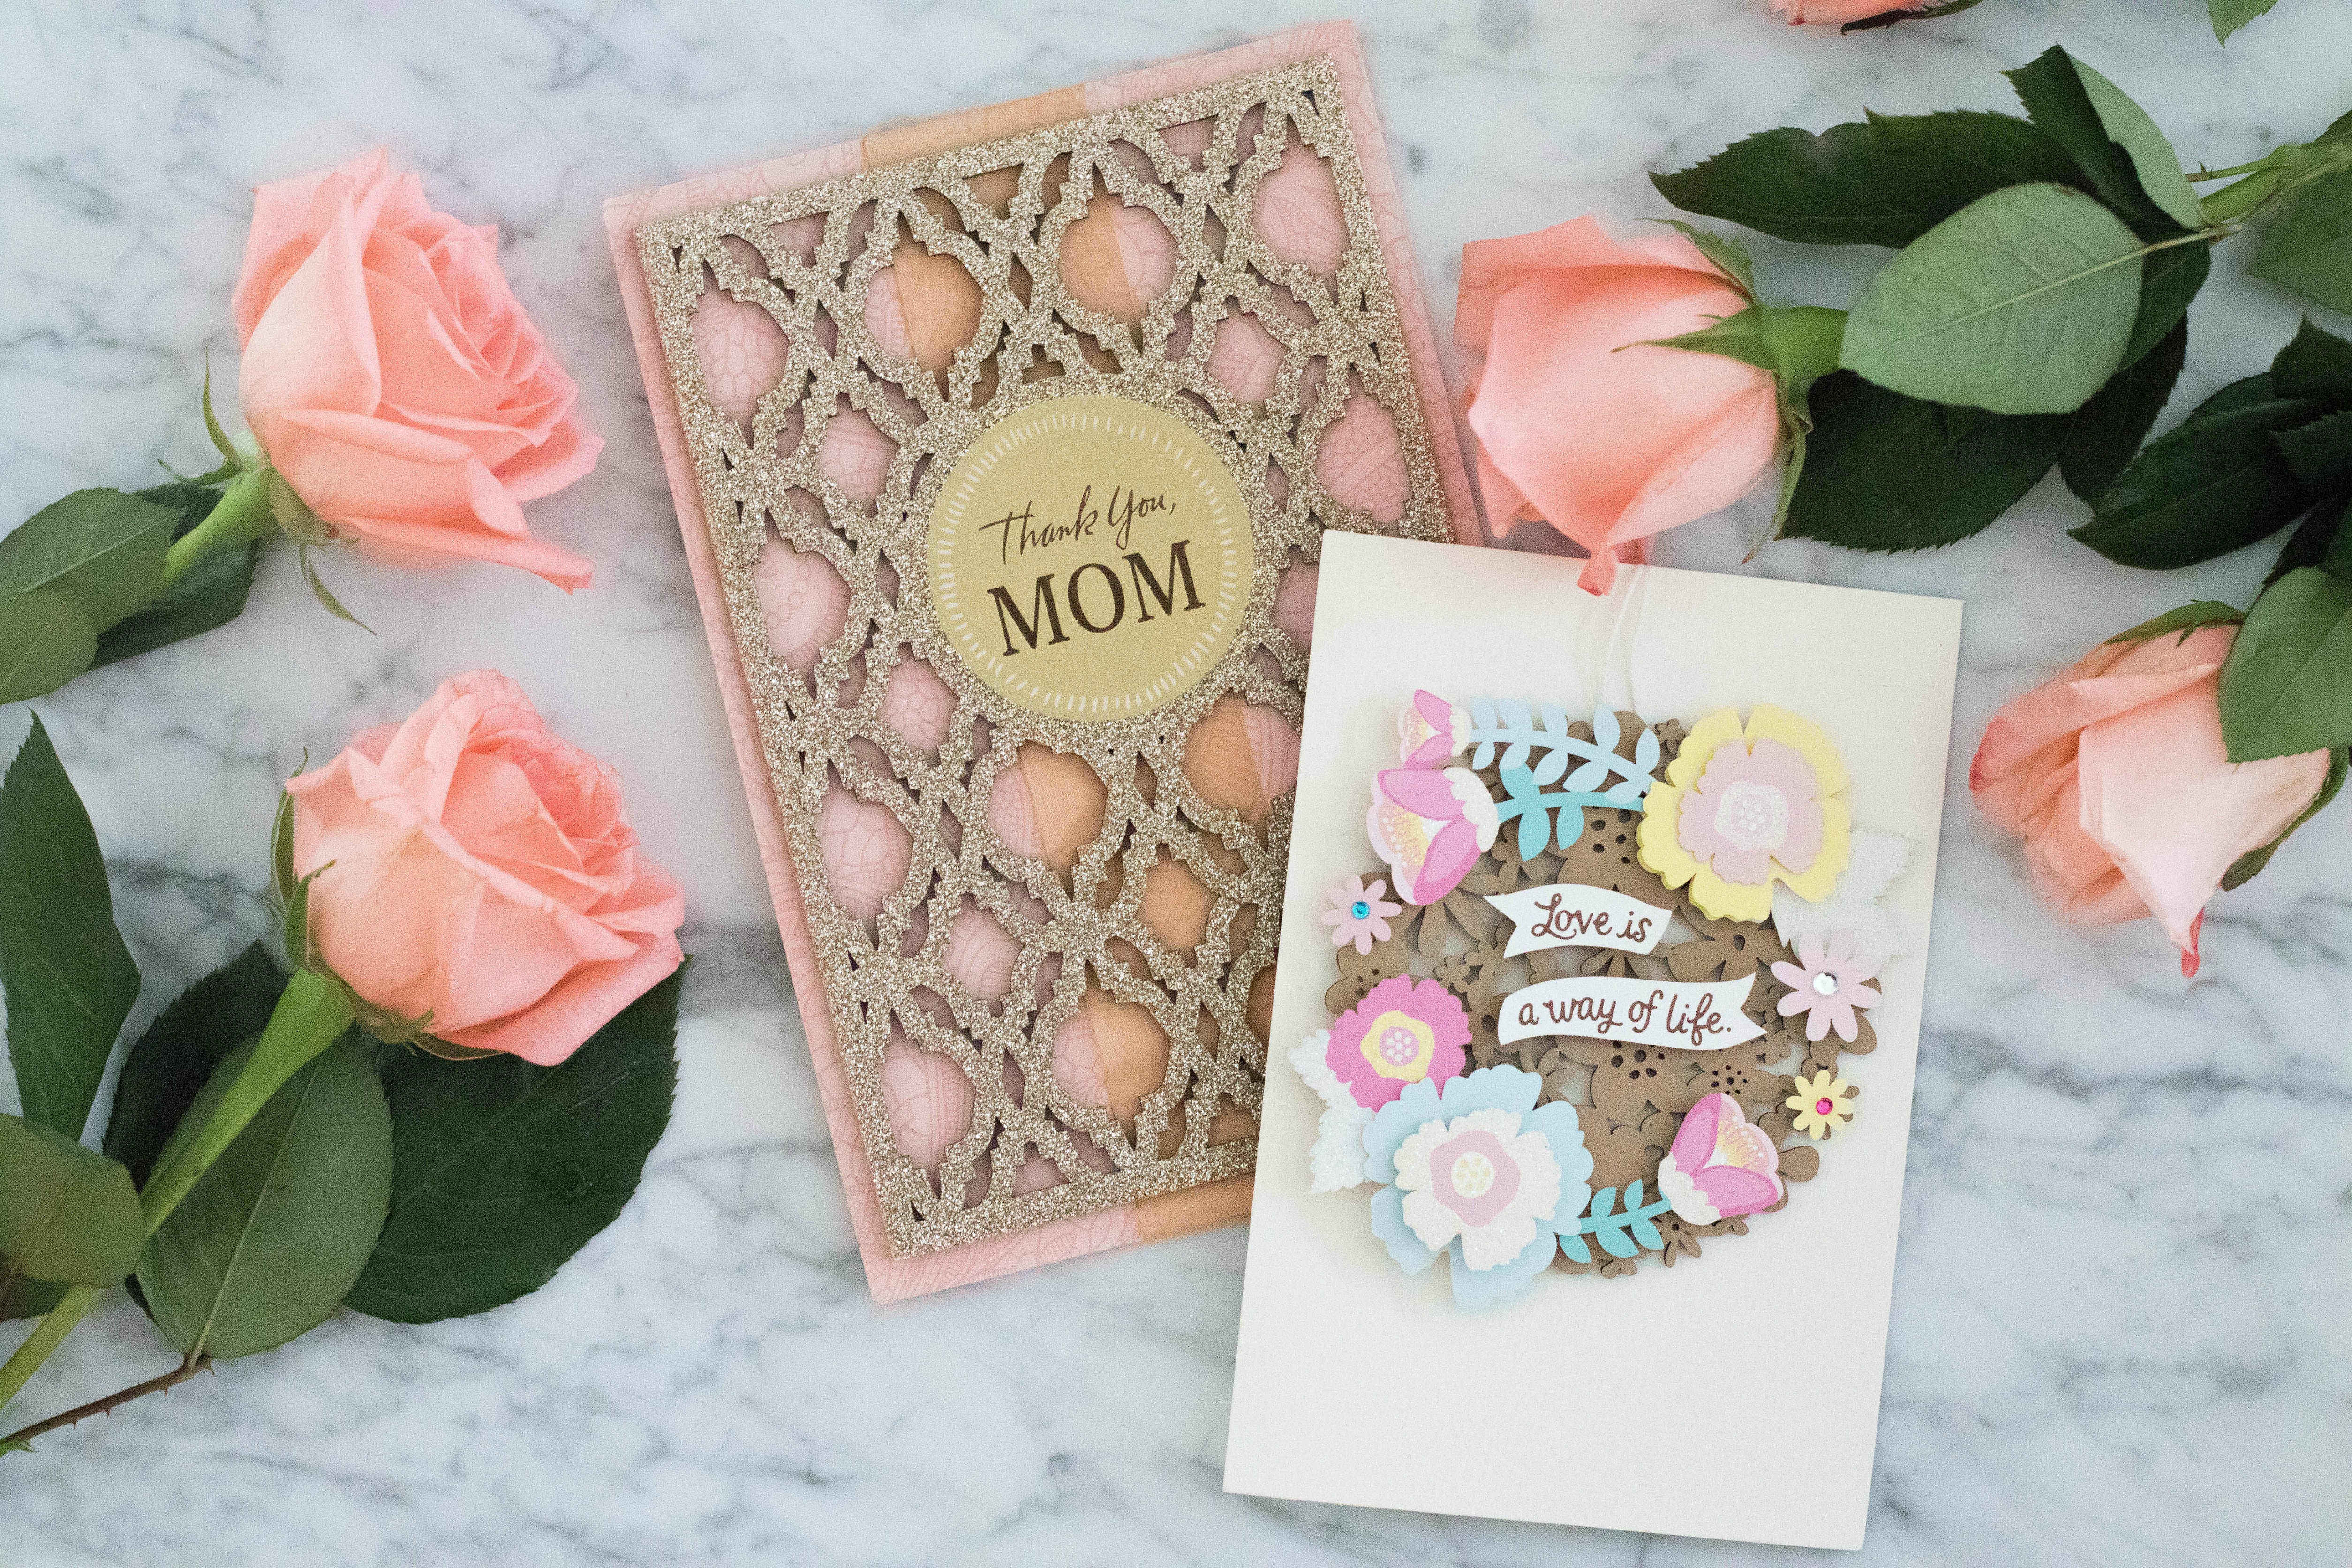 Mother's Day Cards at Walgreens